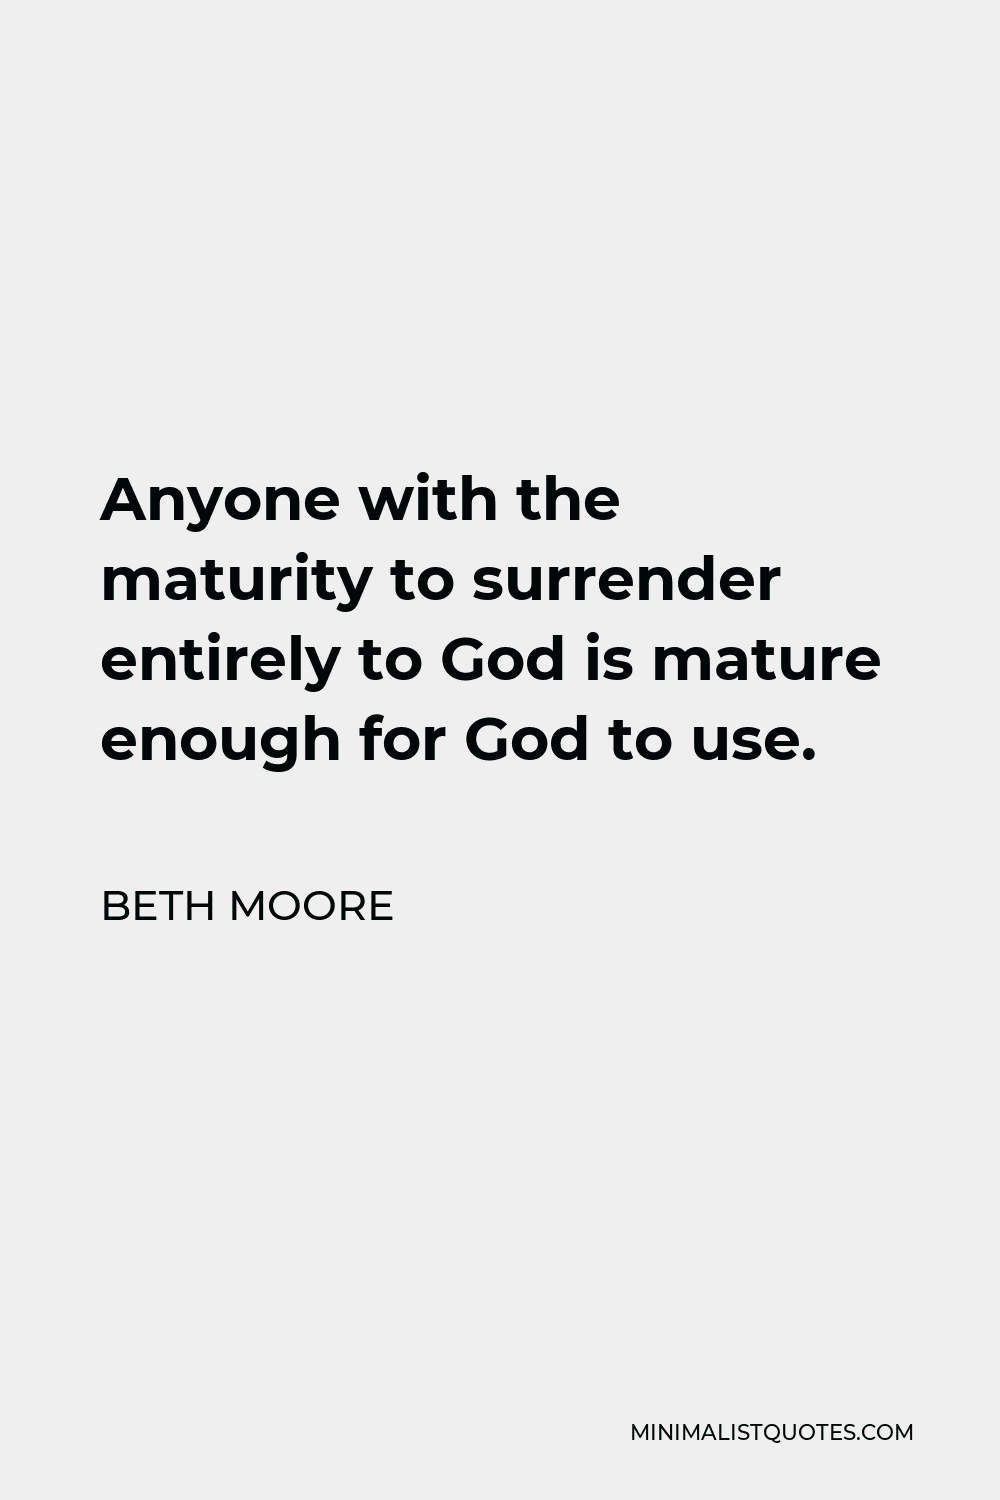 Beth Moore Quote - Anyone with the maturity to surrender entirely to God is mature enough for God to use.